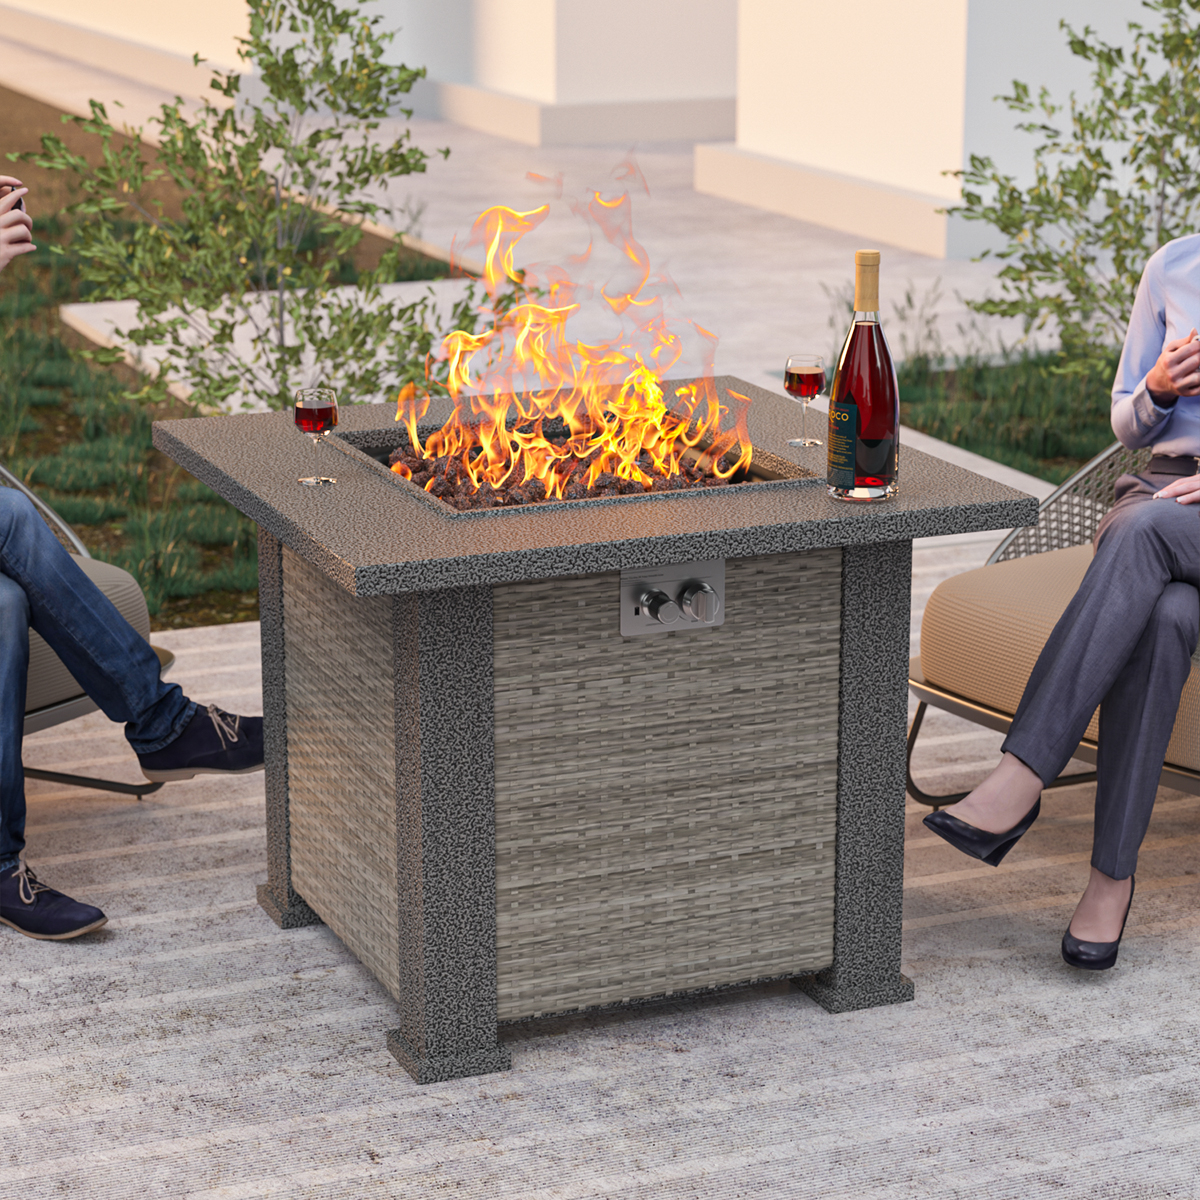 Square-Outdoor-Fireplace-Propane-Fire-Pit-Patio-Gas-Camping-Table-Garden-Burner-1924985-14